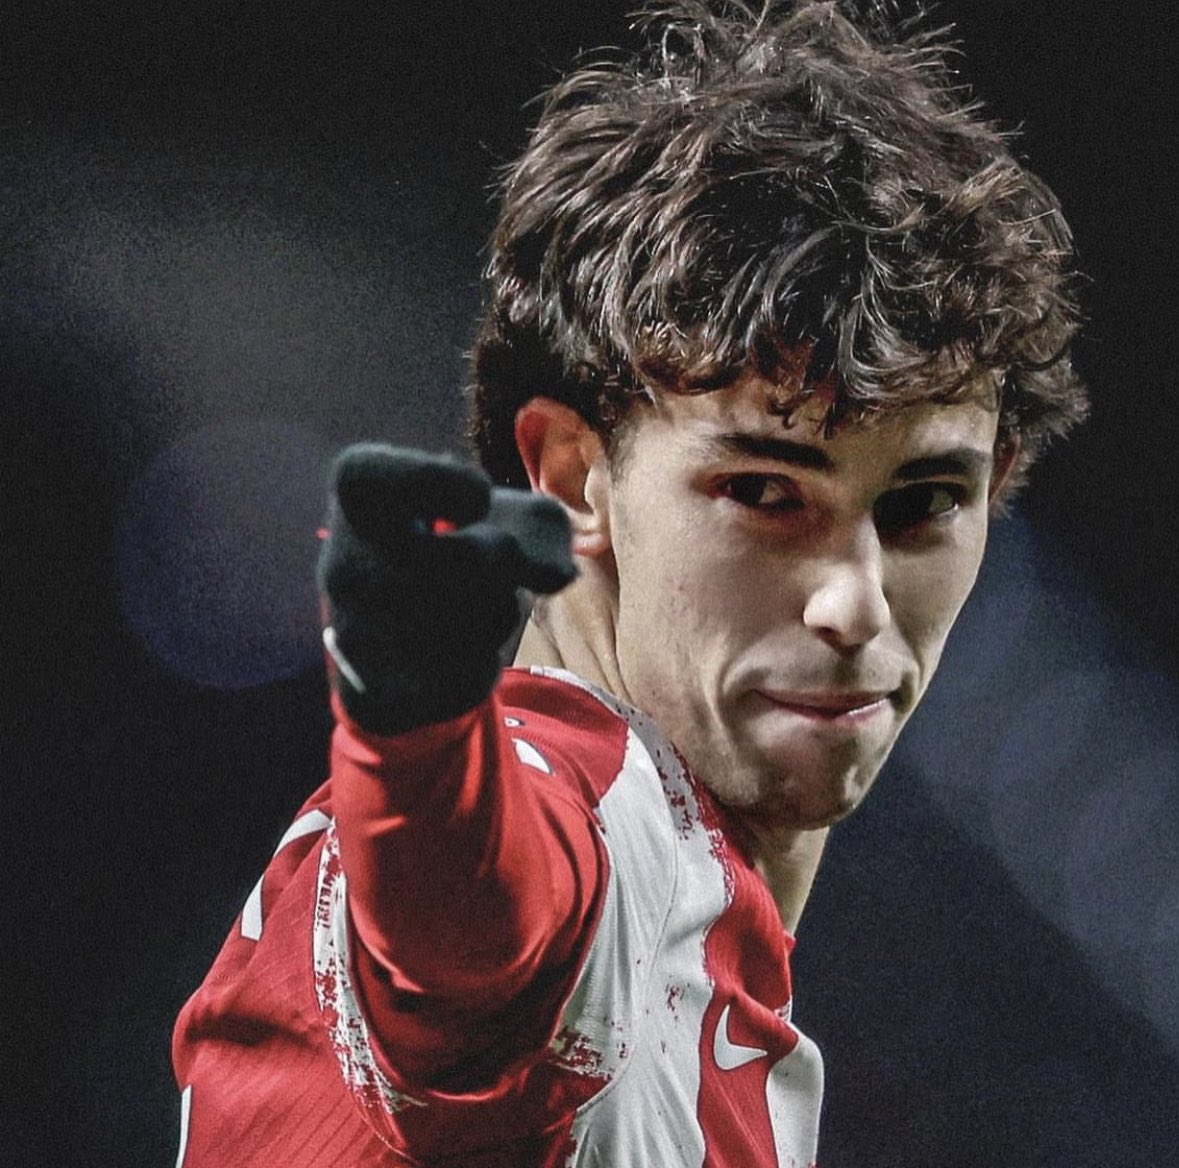 🚨 EXCLUSIVE — João Félix statement on his future: “I’d love to play for Barça”. ◉ “Barcelona has always been my first choice and I’d love to join Barça”. ◉ “It was always my dream since I was a kid”. ◉ “If it happens, it will be a dream come true for me”.